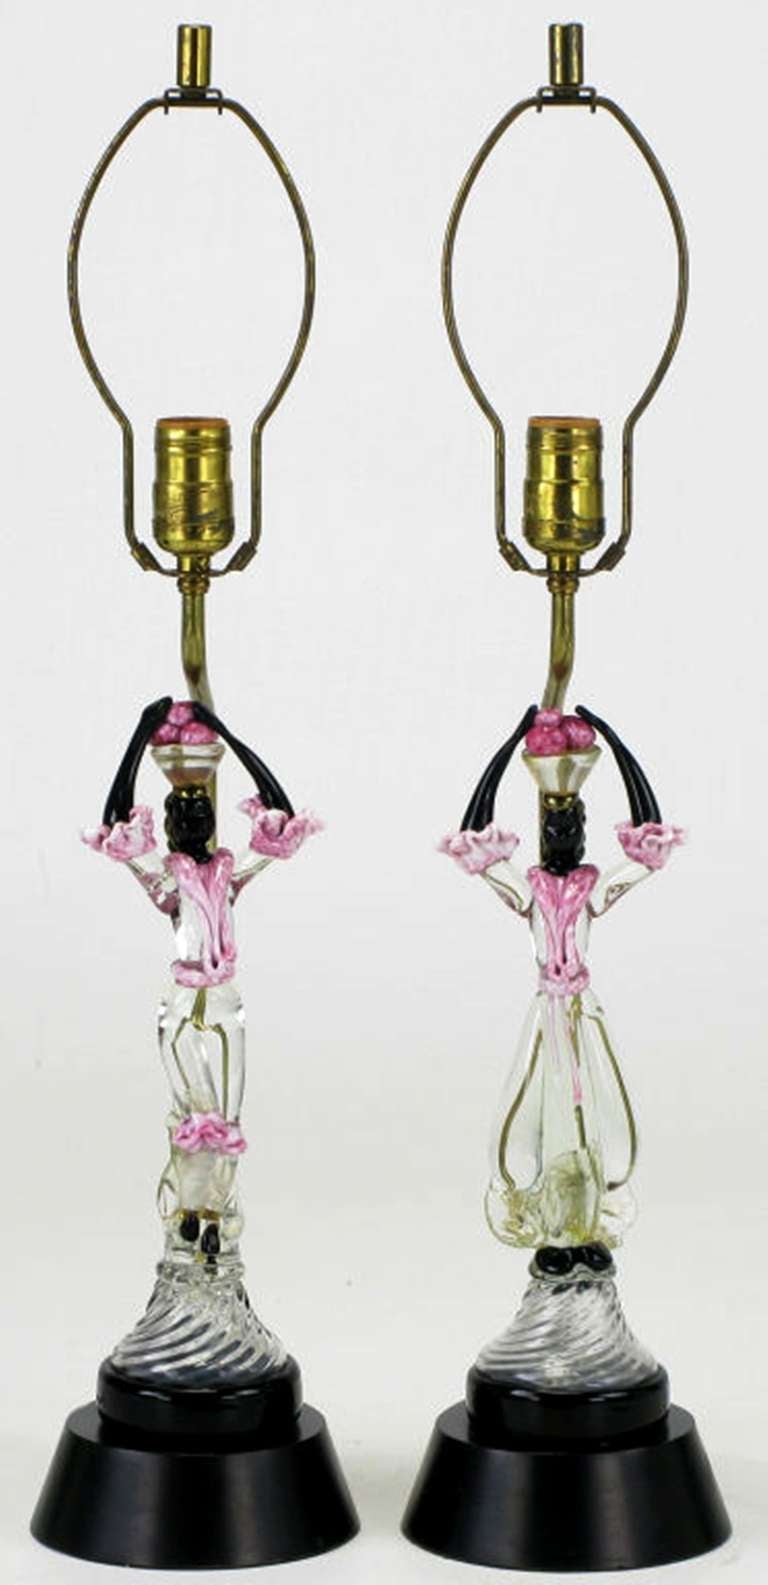 Pair of table lamps with fused Murano glass sculptures depicting African women, carrying baskets of fruit in colorful attire. Mounted on black lacquered bases with brass stems and sockets. Sold sans shades.